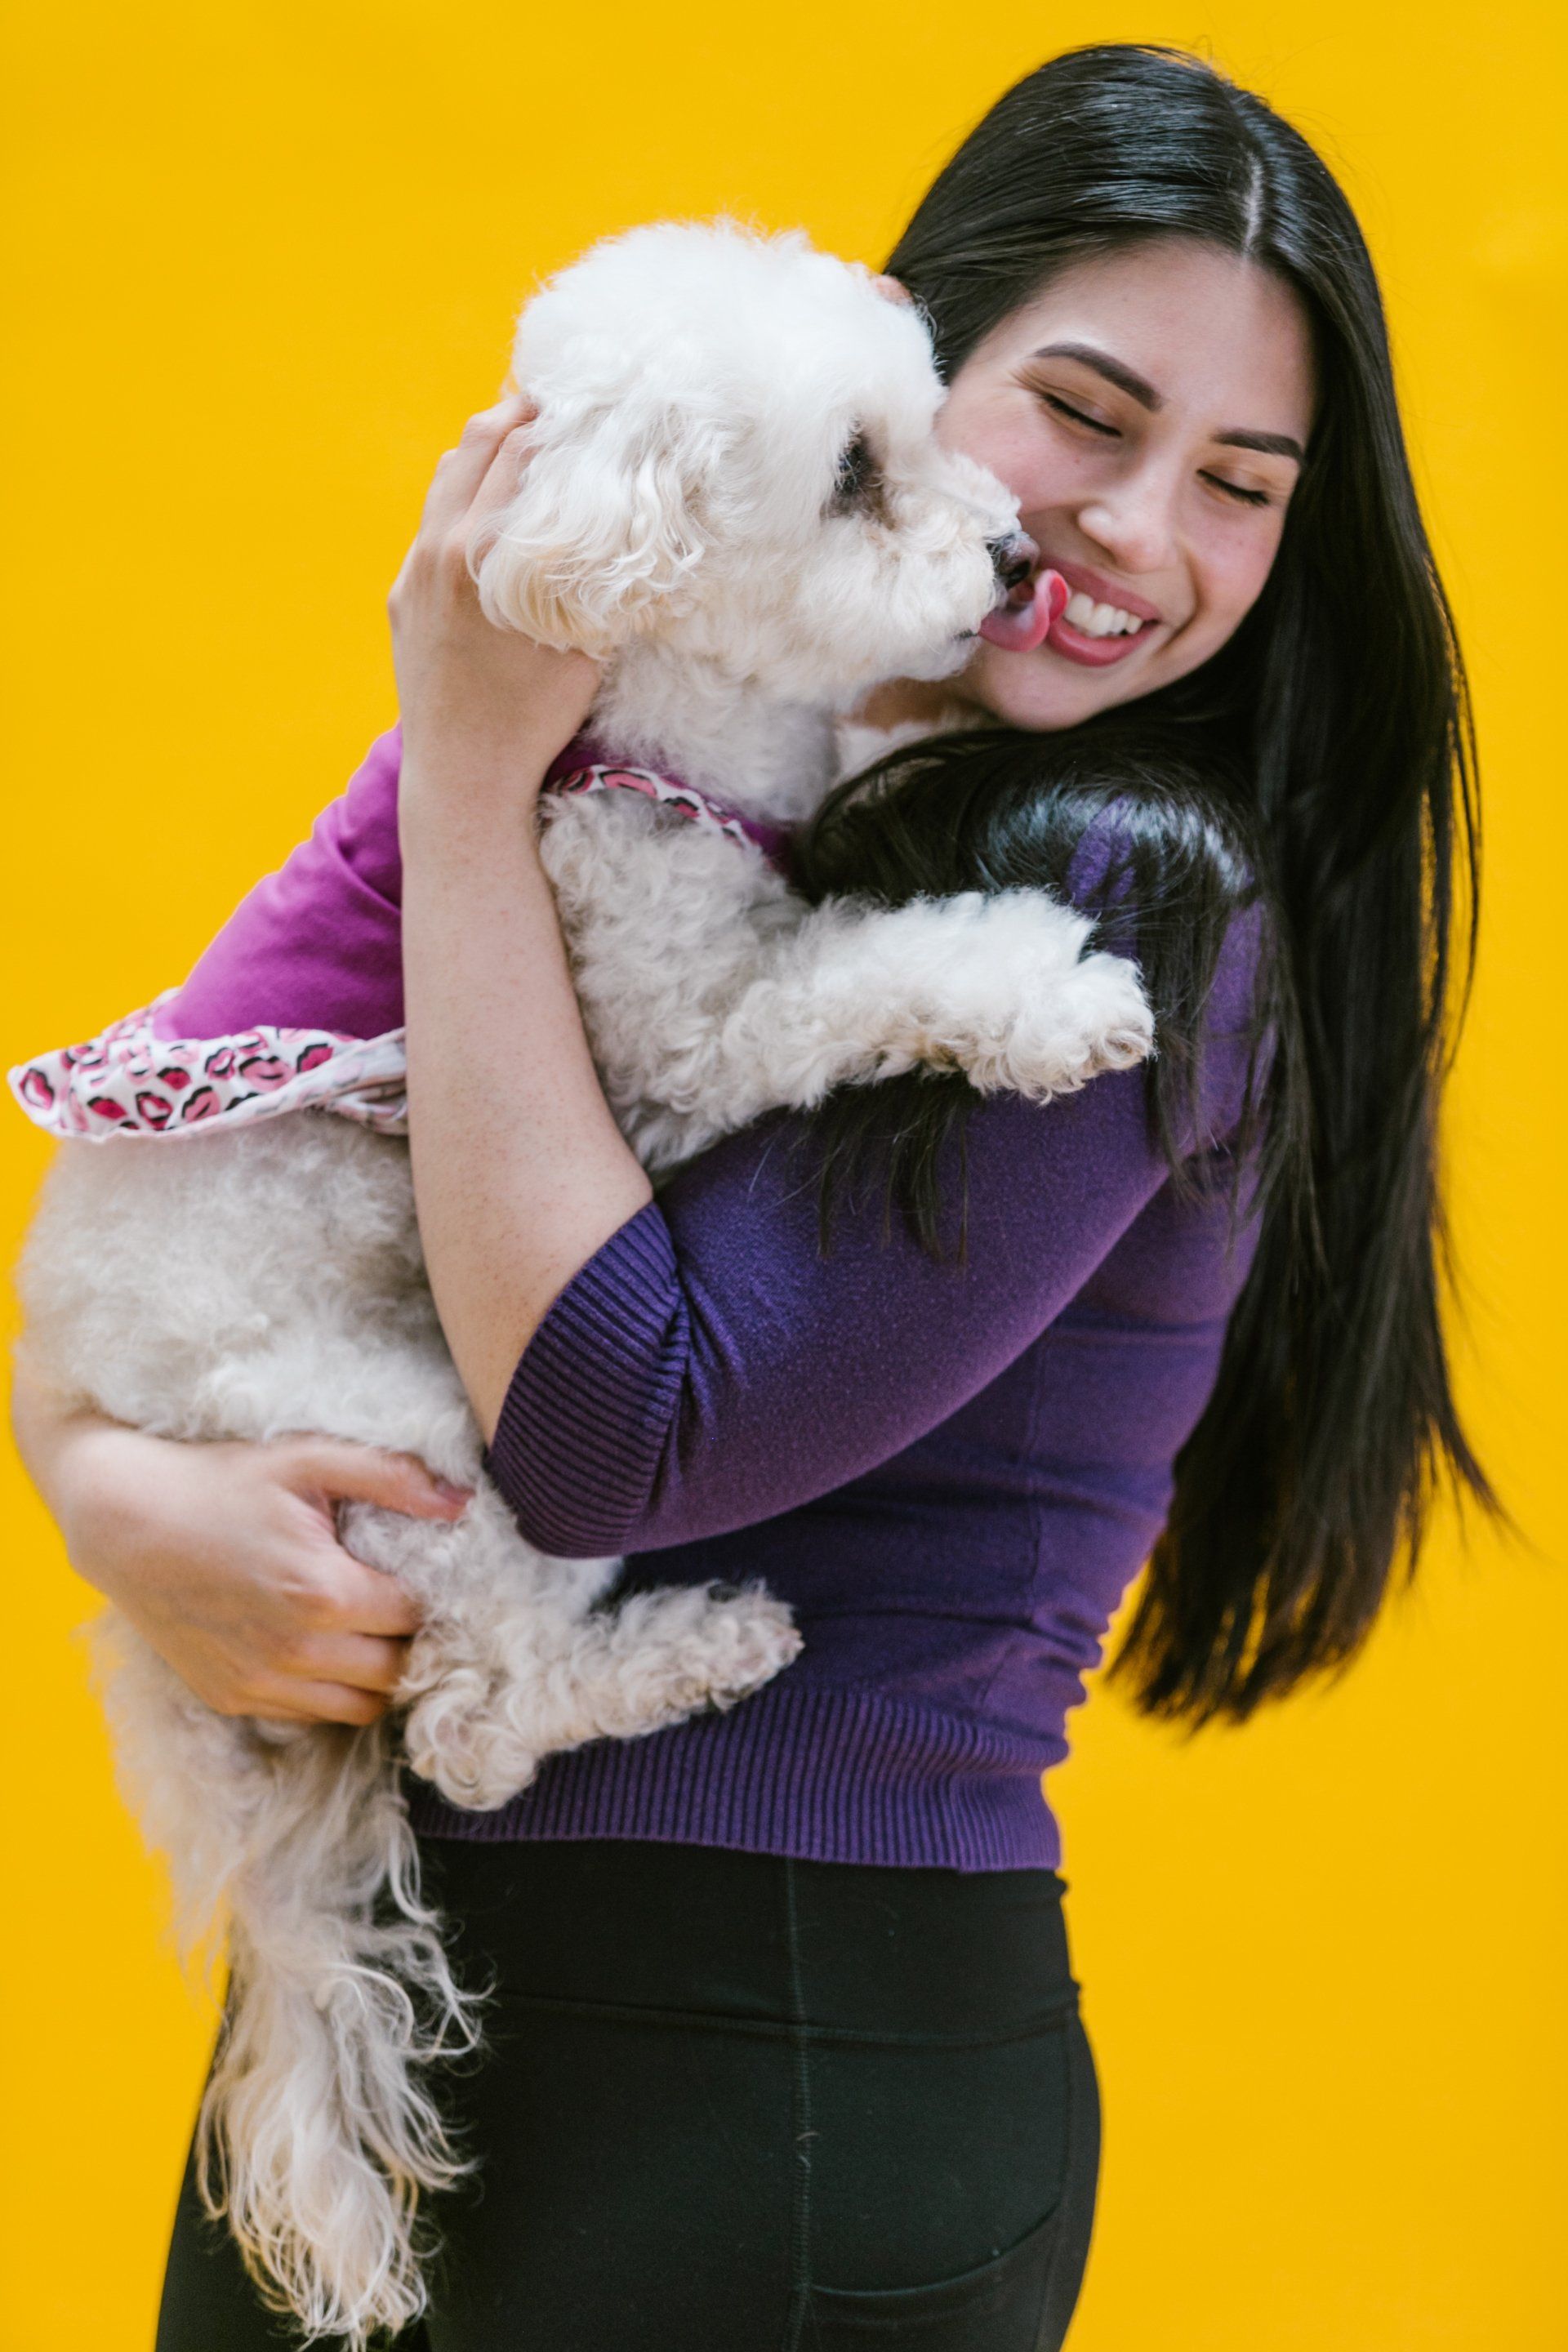 Woman happily holding a white dog smiling and happy